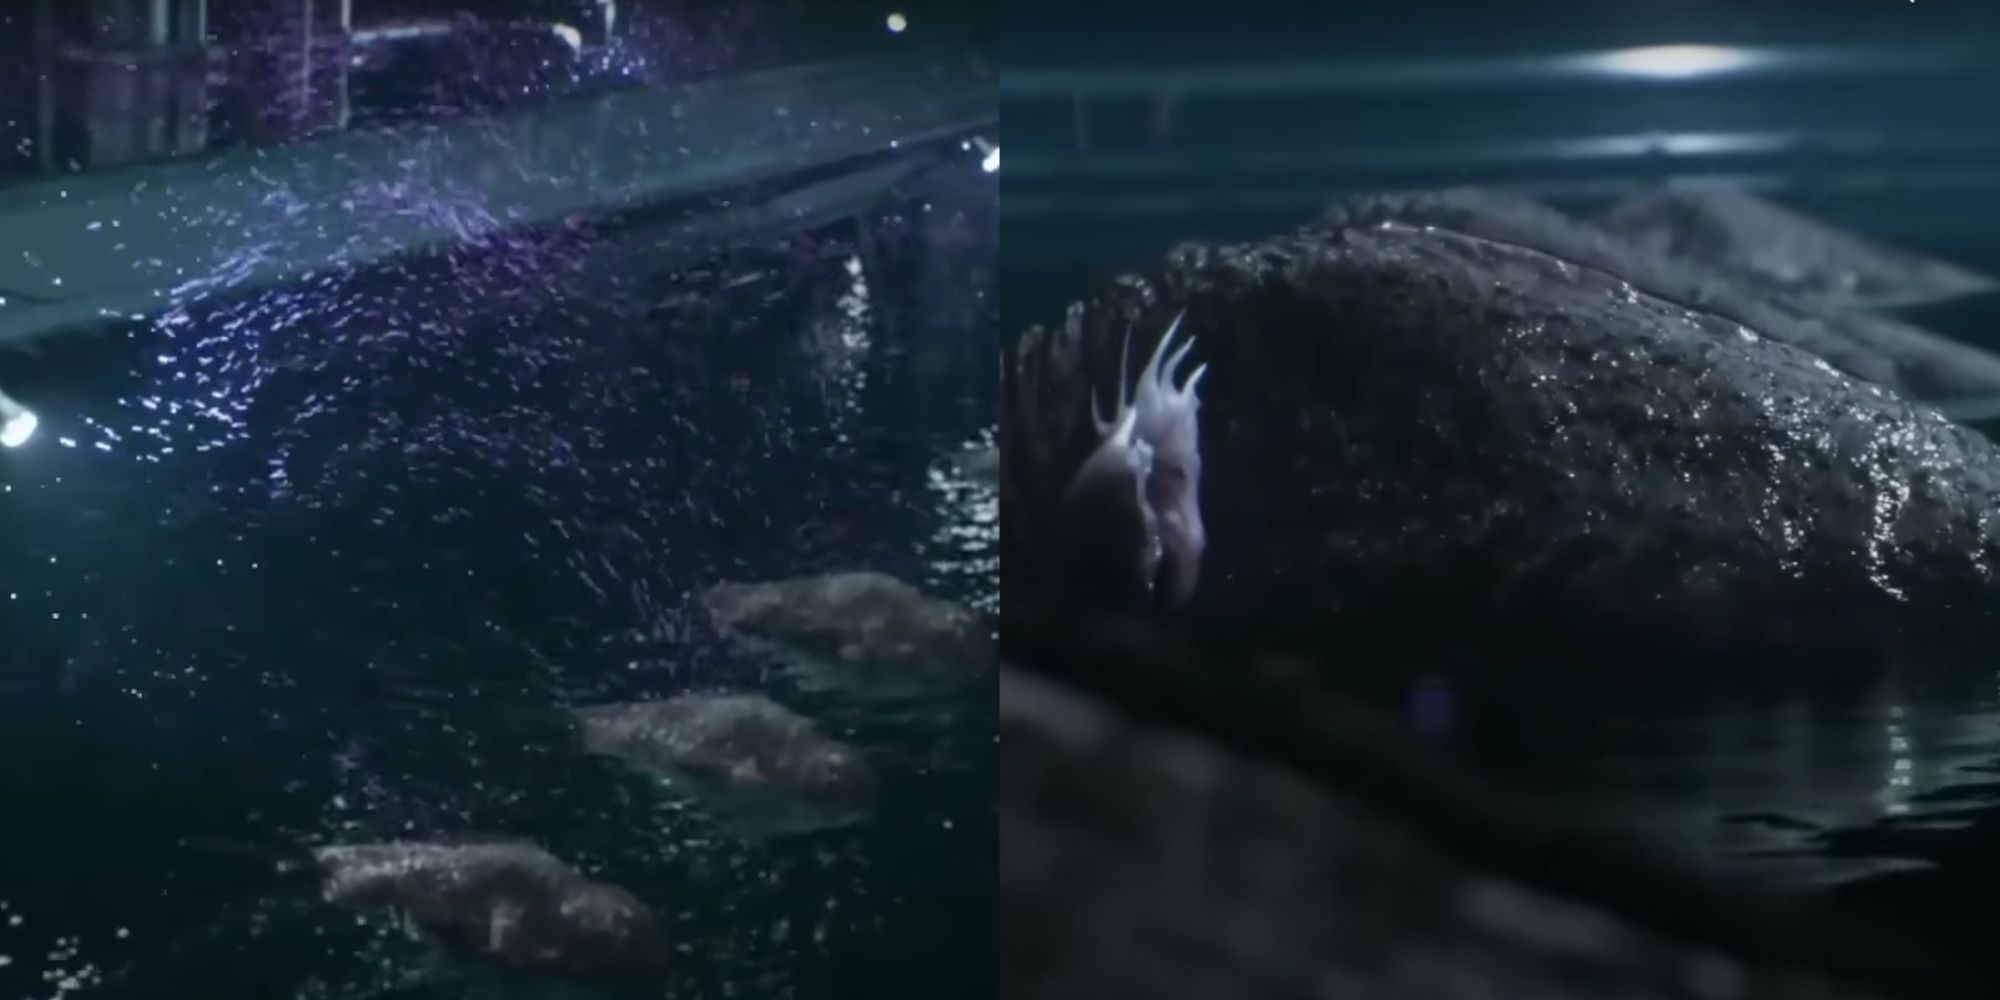 A split image of a zombie aquatic species that releases virus particles into the air, and a close-up of its body with special gills.